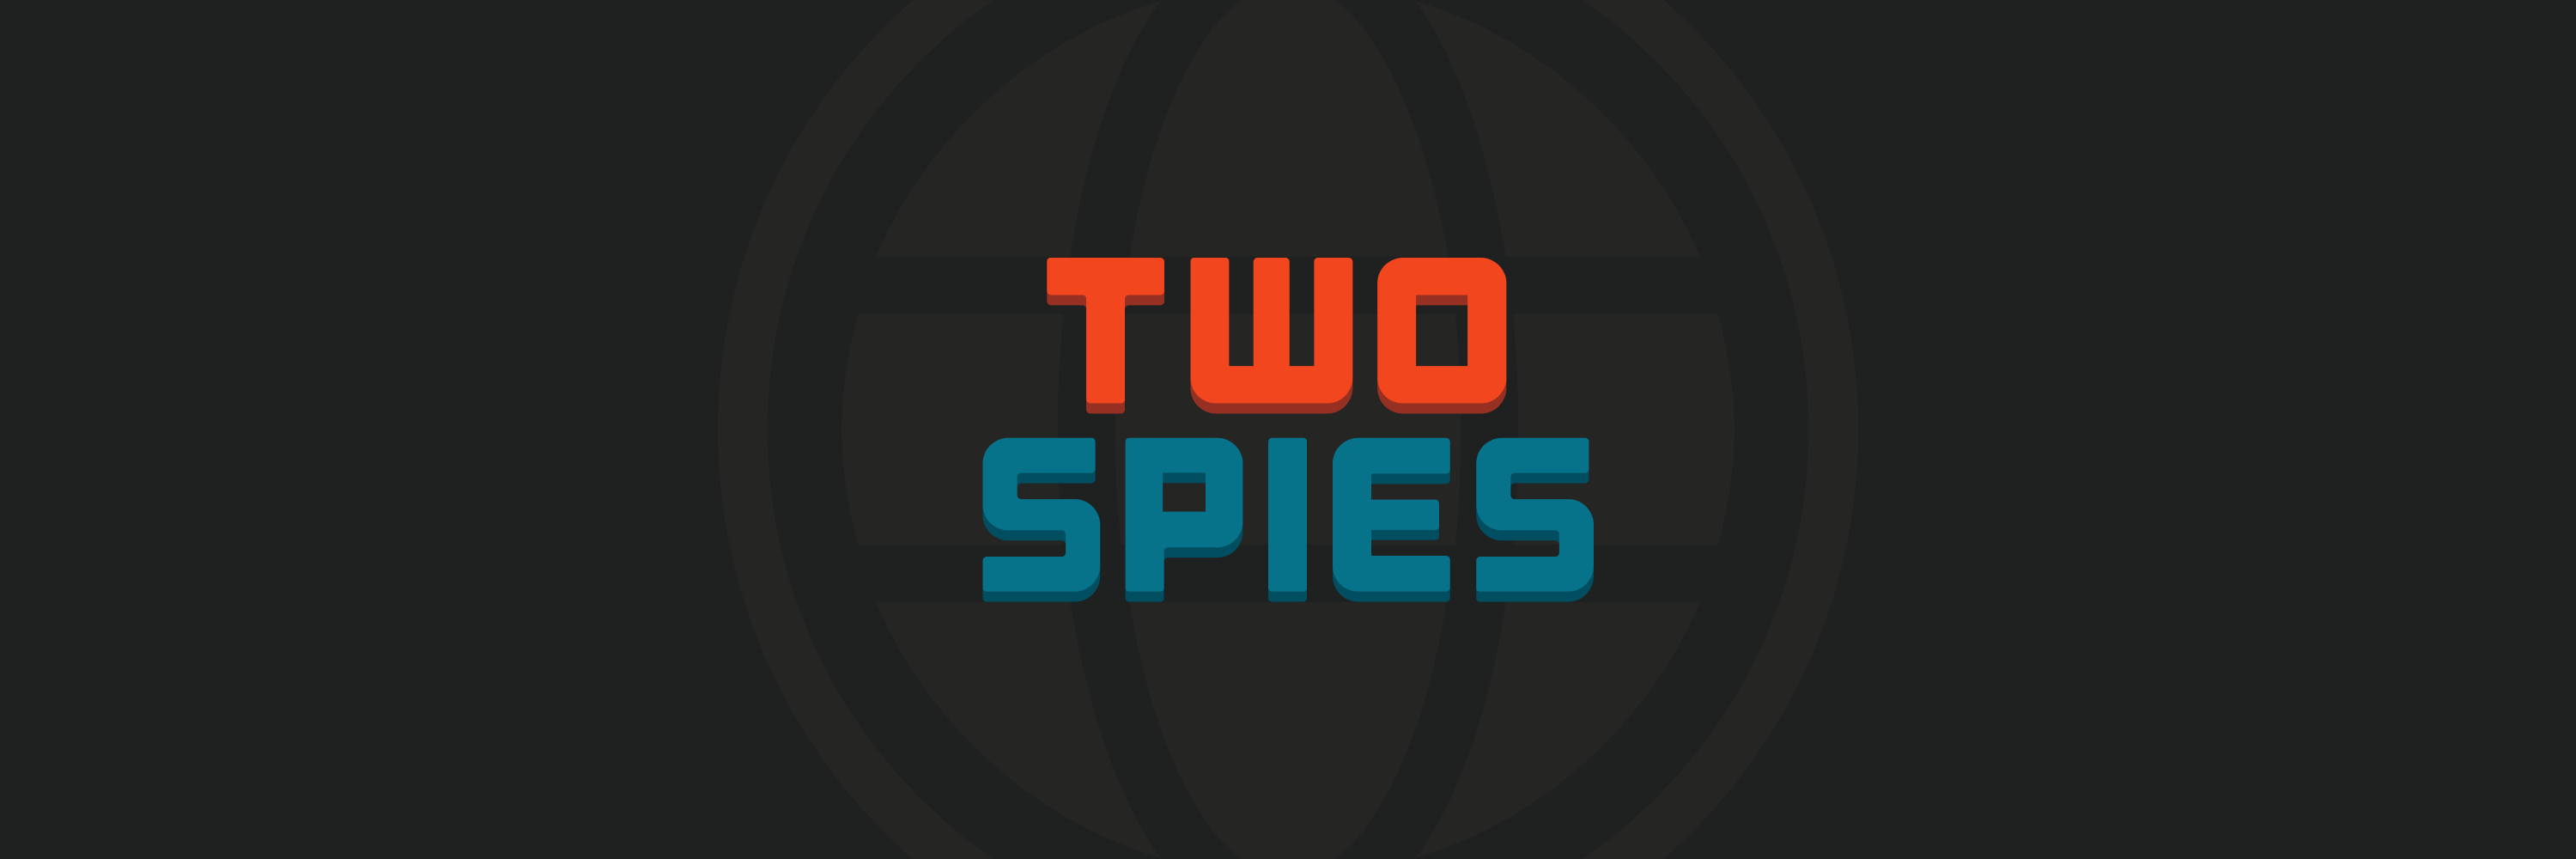 Two Spies game logo